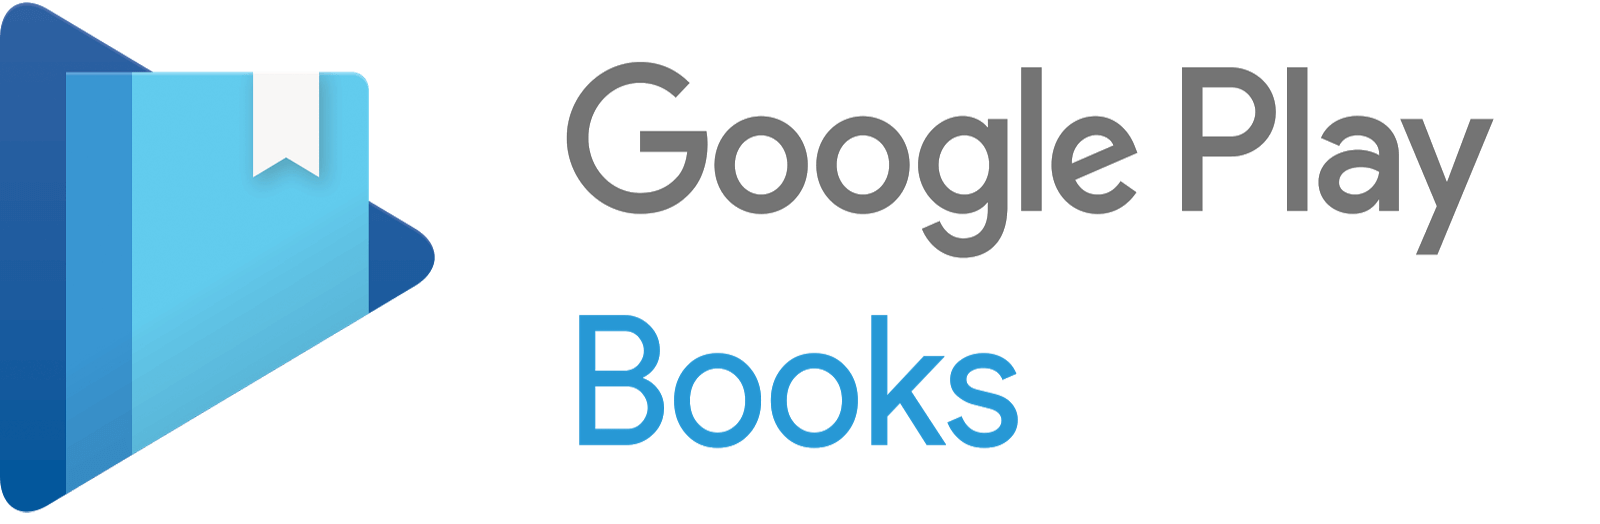 Google Play Books for PC Windows XP/7/8/8.1/10 and Mac Download